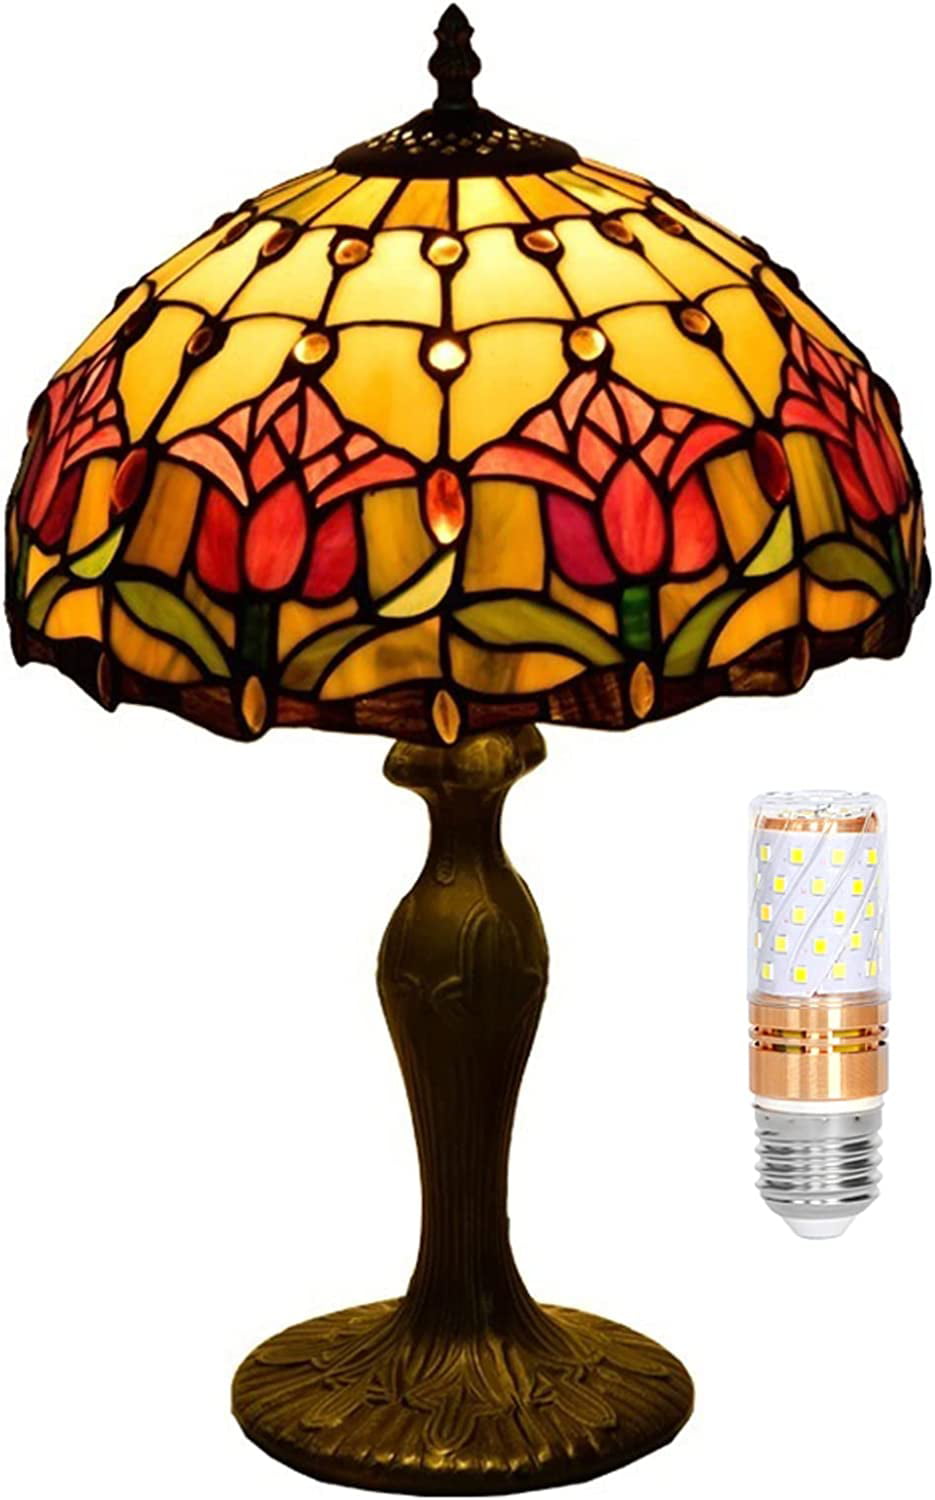 SHADY  Lamp Stained Glass Lamp Red Tulip Bedroom Table Lamp Reading Desk Light for Bedside Living Room Office Dormitory Dining Room Decorate  12x12x18 Include Light Bulb